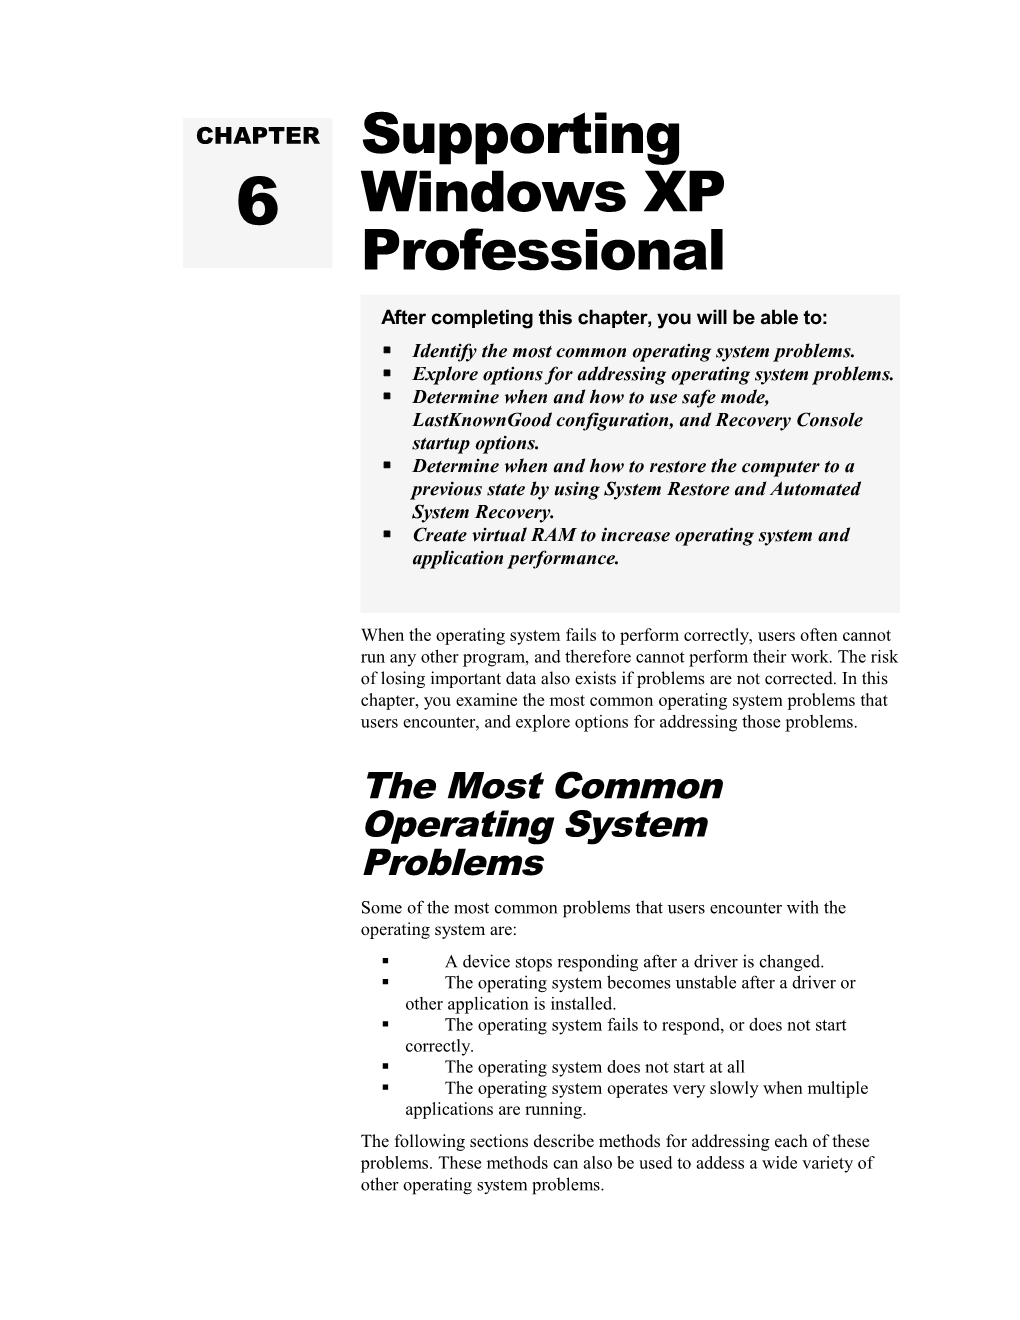 Supporting Windows XP Professional 1